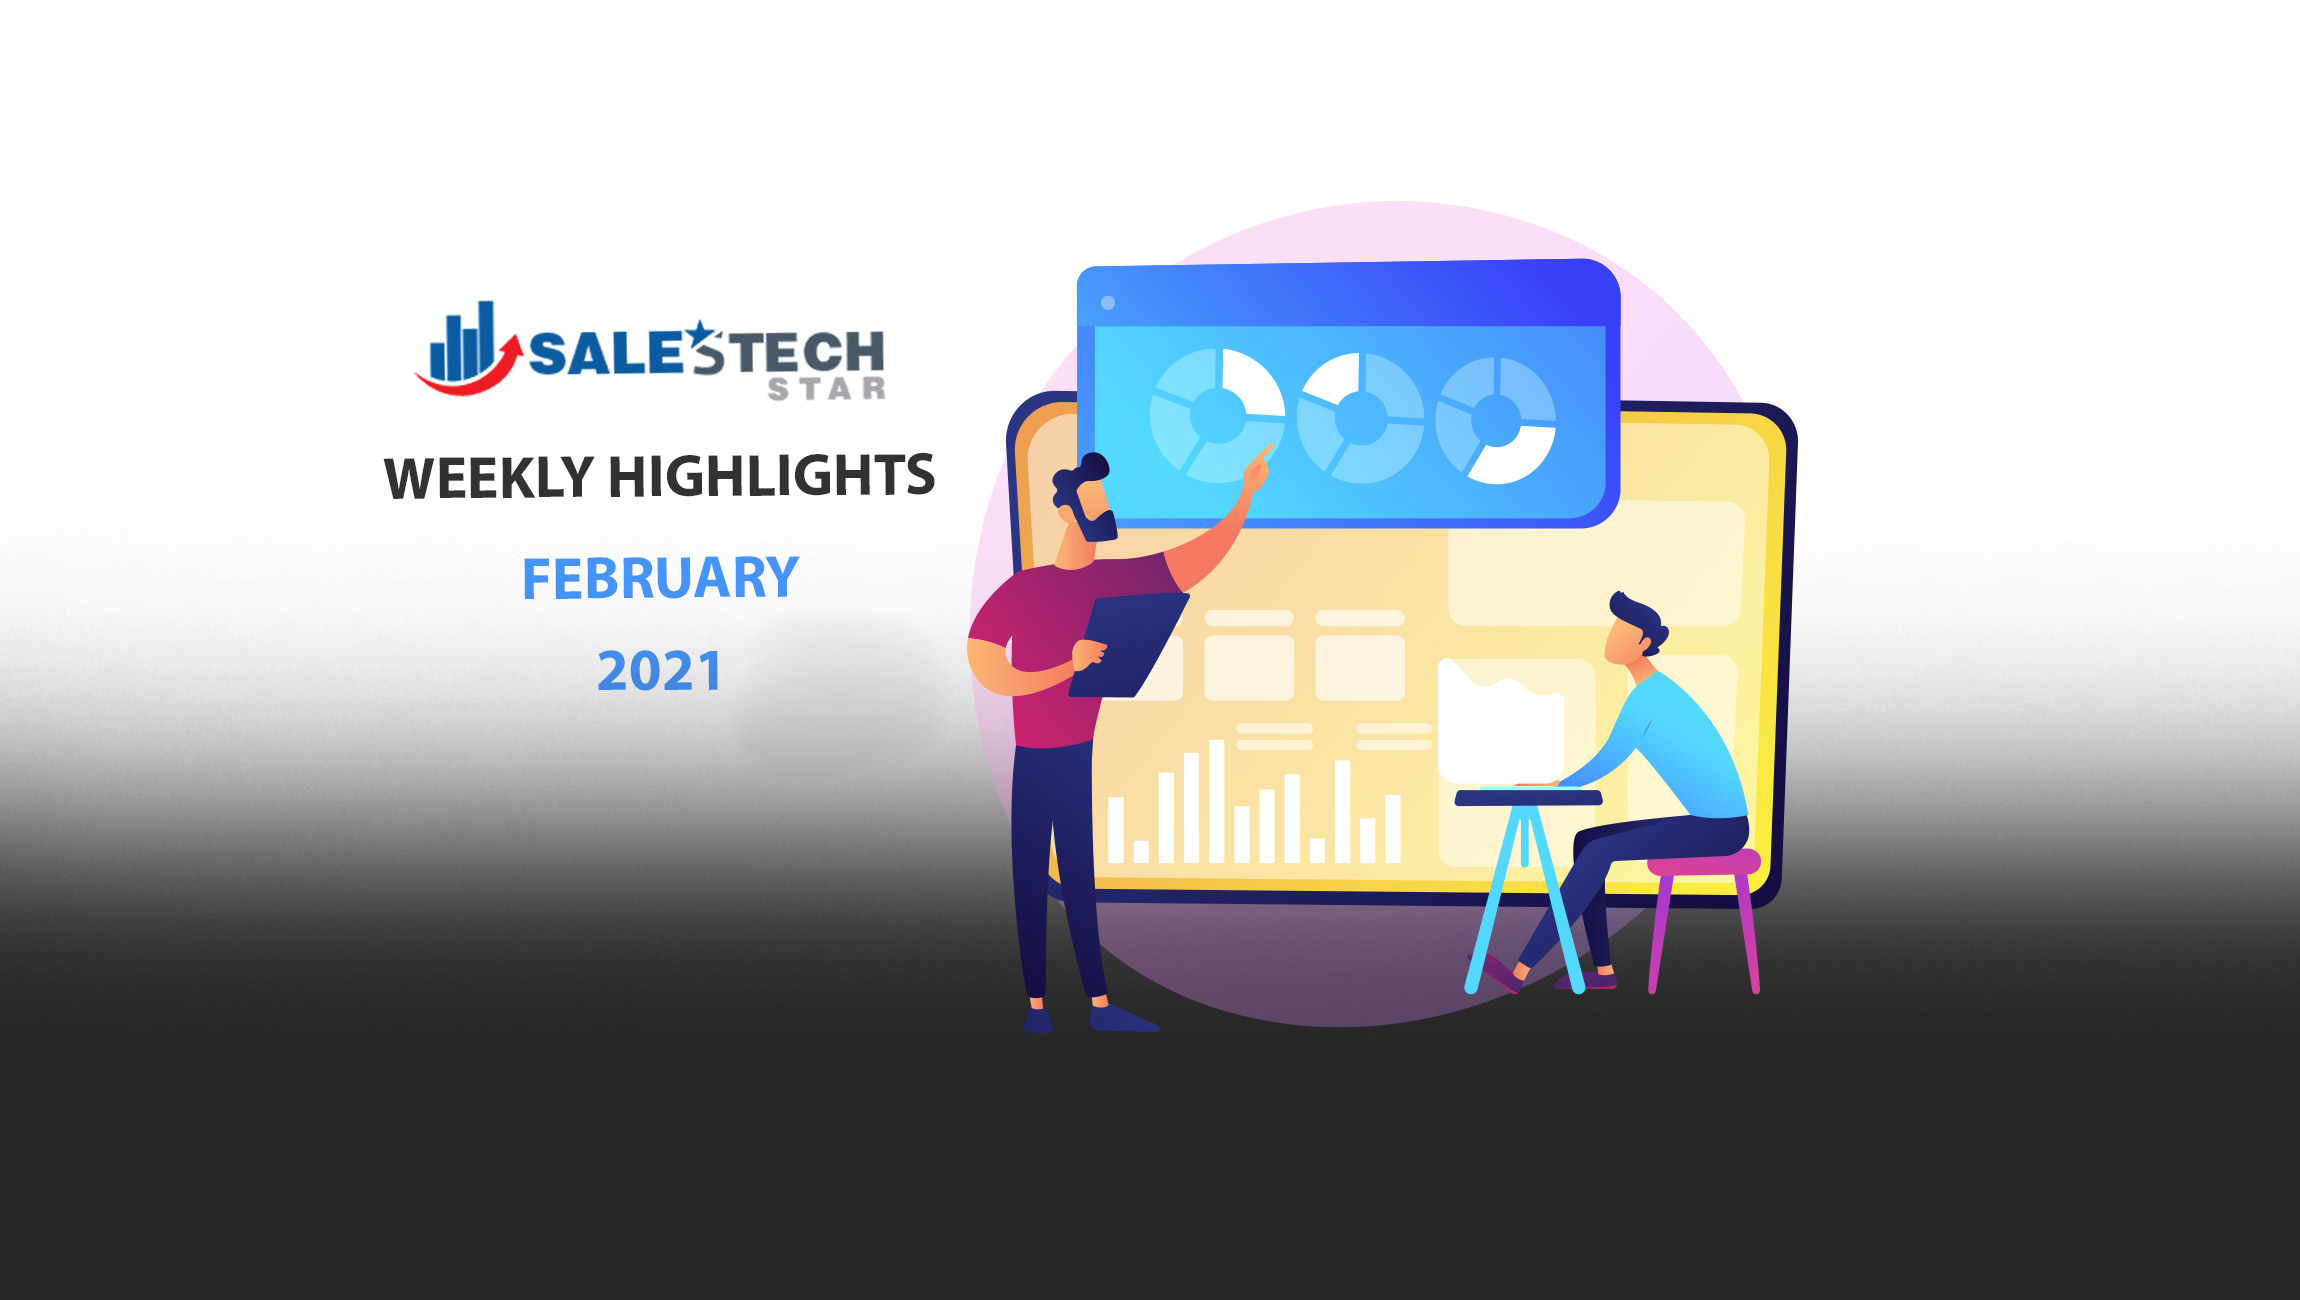 Sales Technology Highlights of The Week: 08-February-2021: Featuring TikTok, Alteryx, ZoomInfo, UiPath and more!